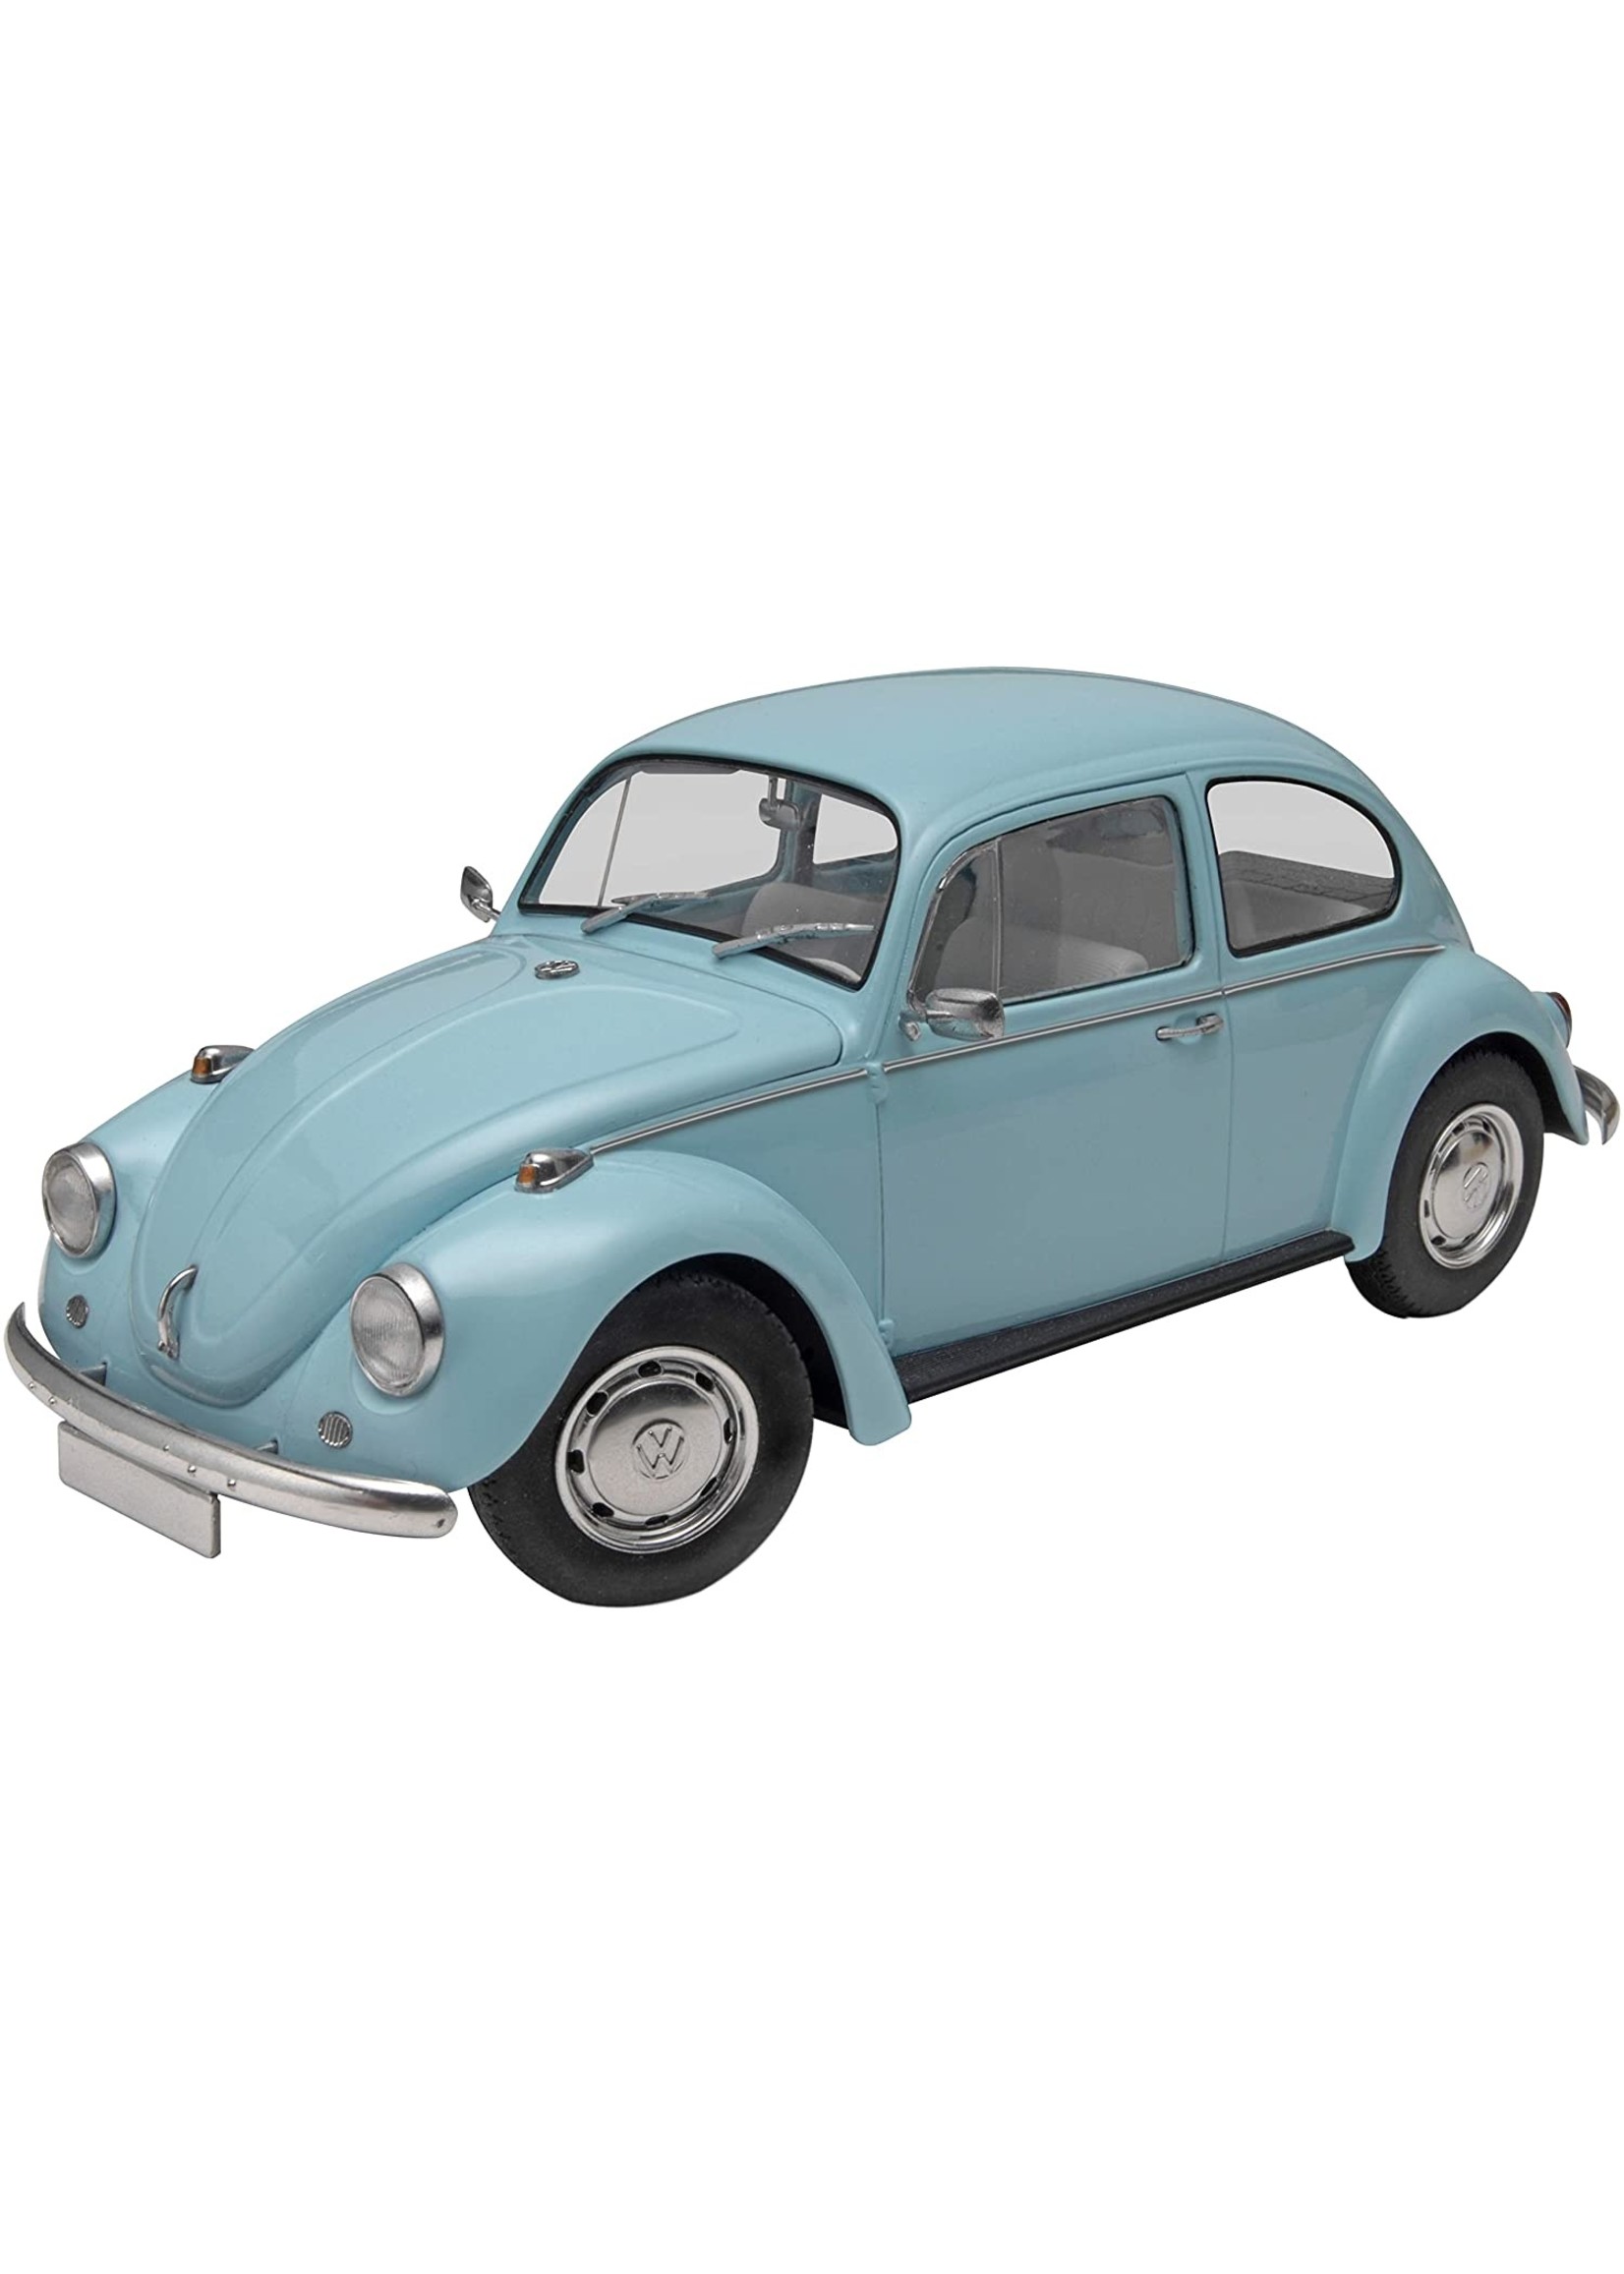 Revell 4192 - 1/24 '60s Beetle Type 1